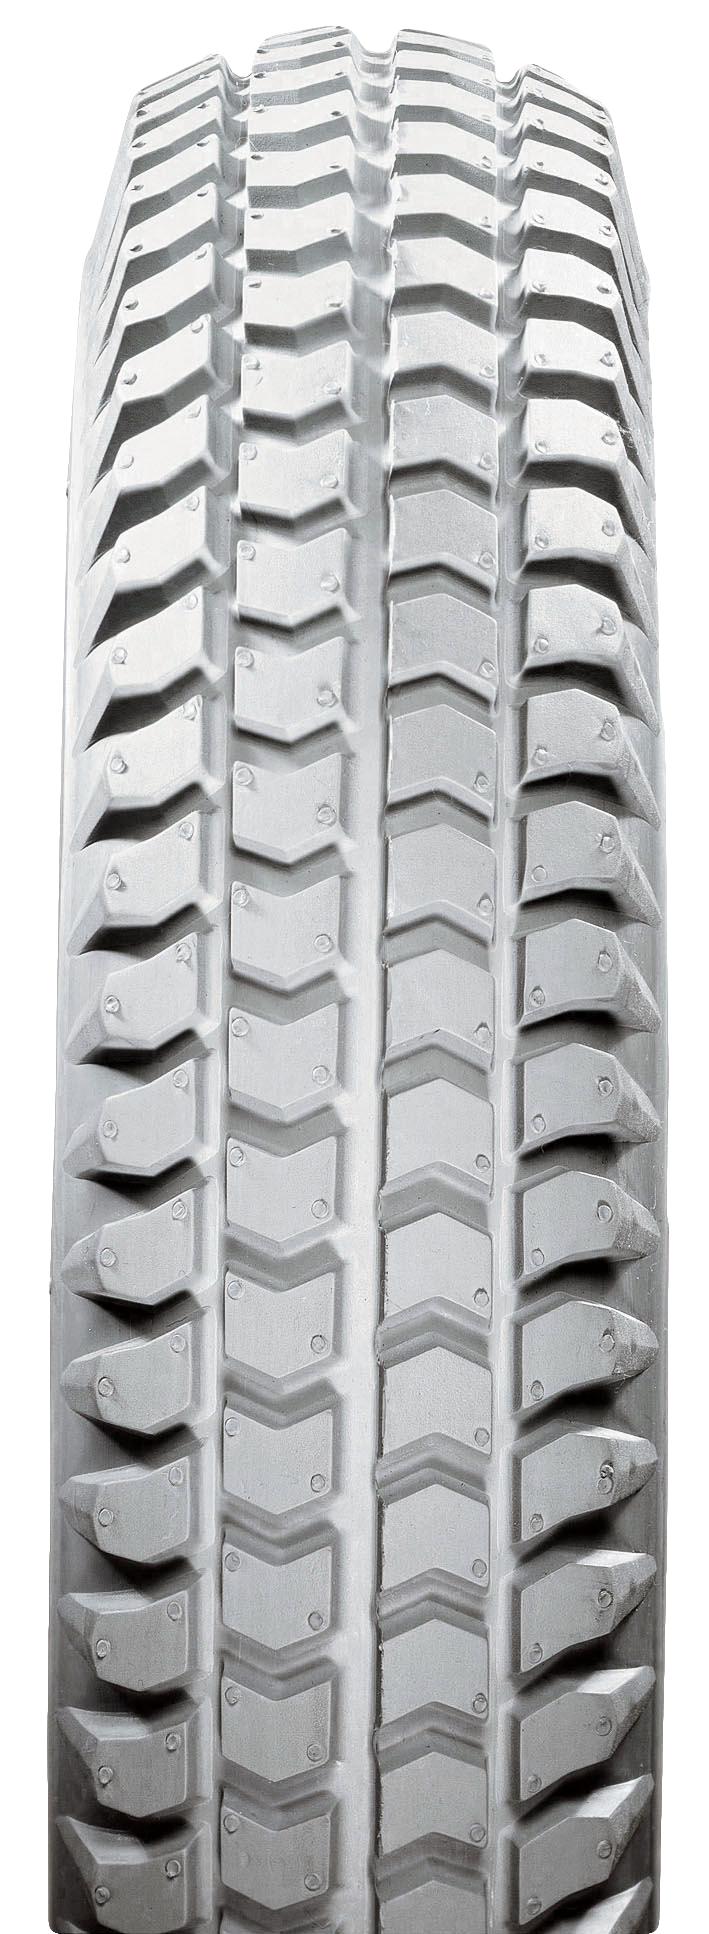 3.00-4" (10x3")  All Weather Tire